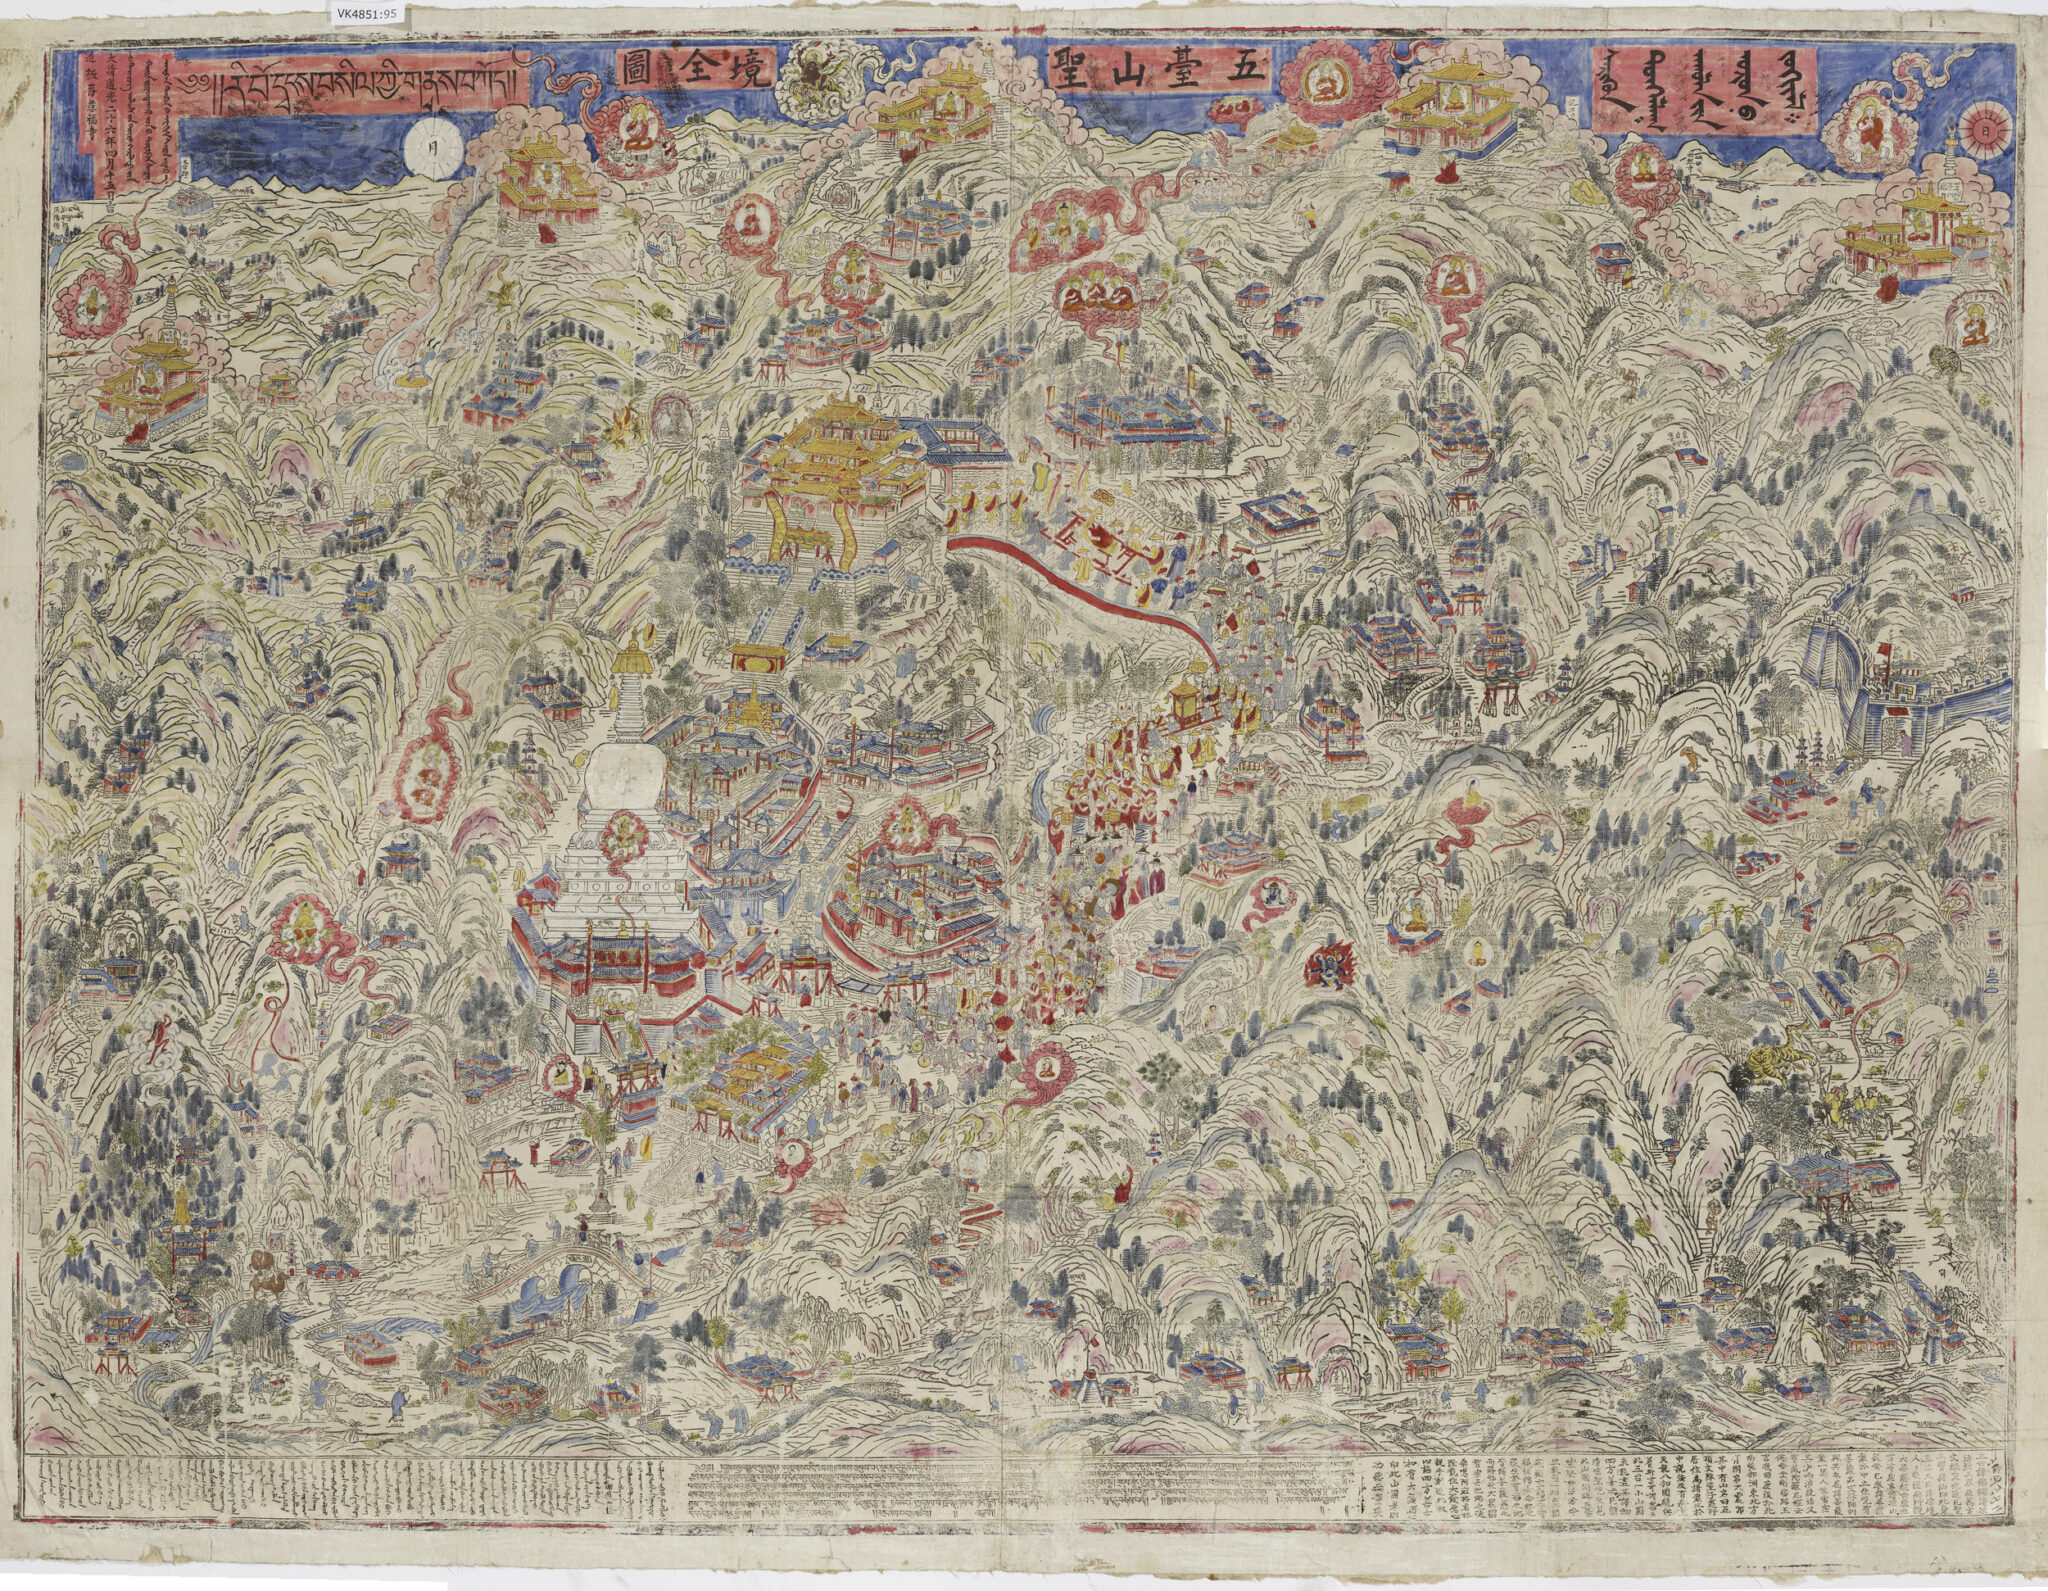 Beige, red, and green mural depicting various buildings and features of mountainous landscape; Chinese and Tibetan text at top